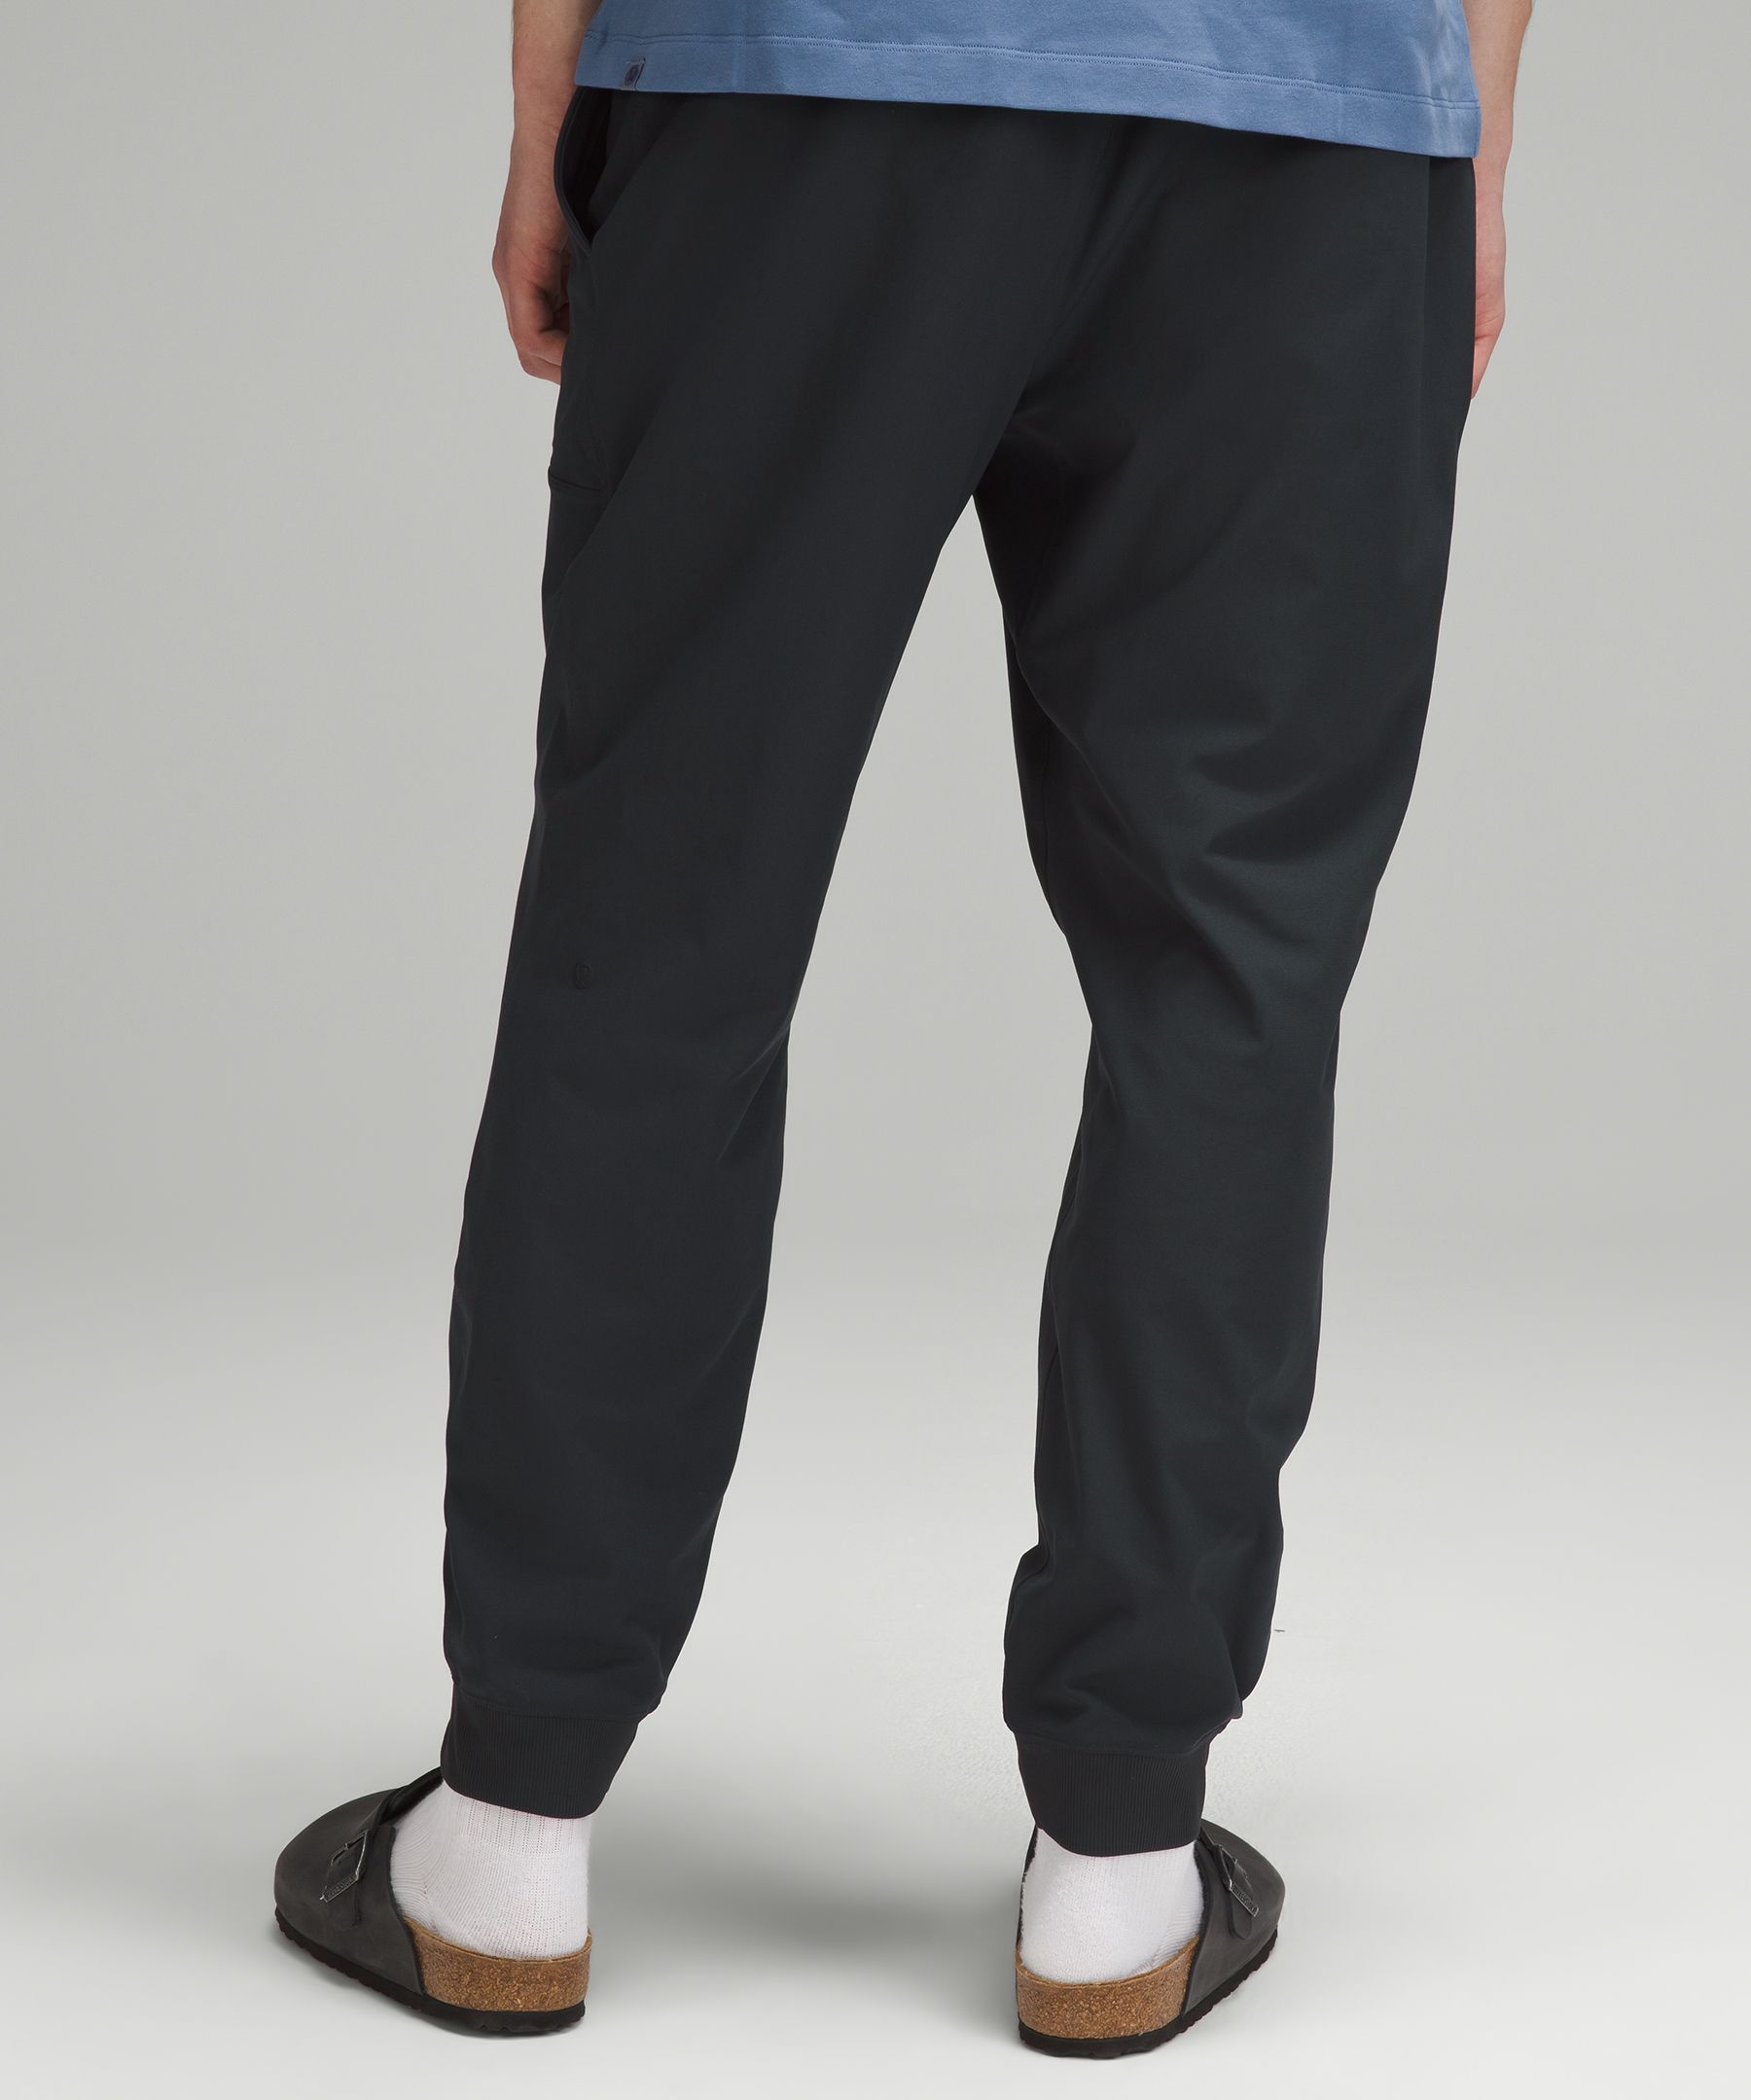 LULULEMON ABC JOGGER IN TRUE NAVY  Navy fashion, Clothes design, Joggers